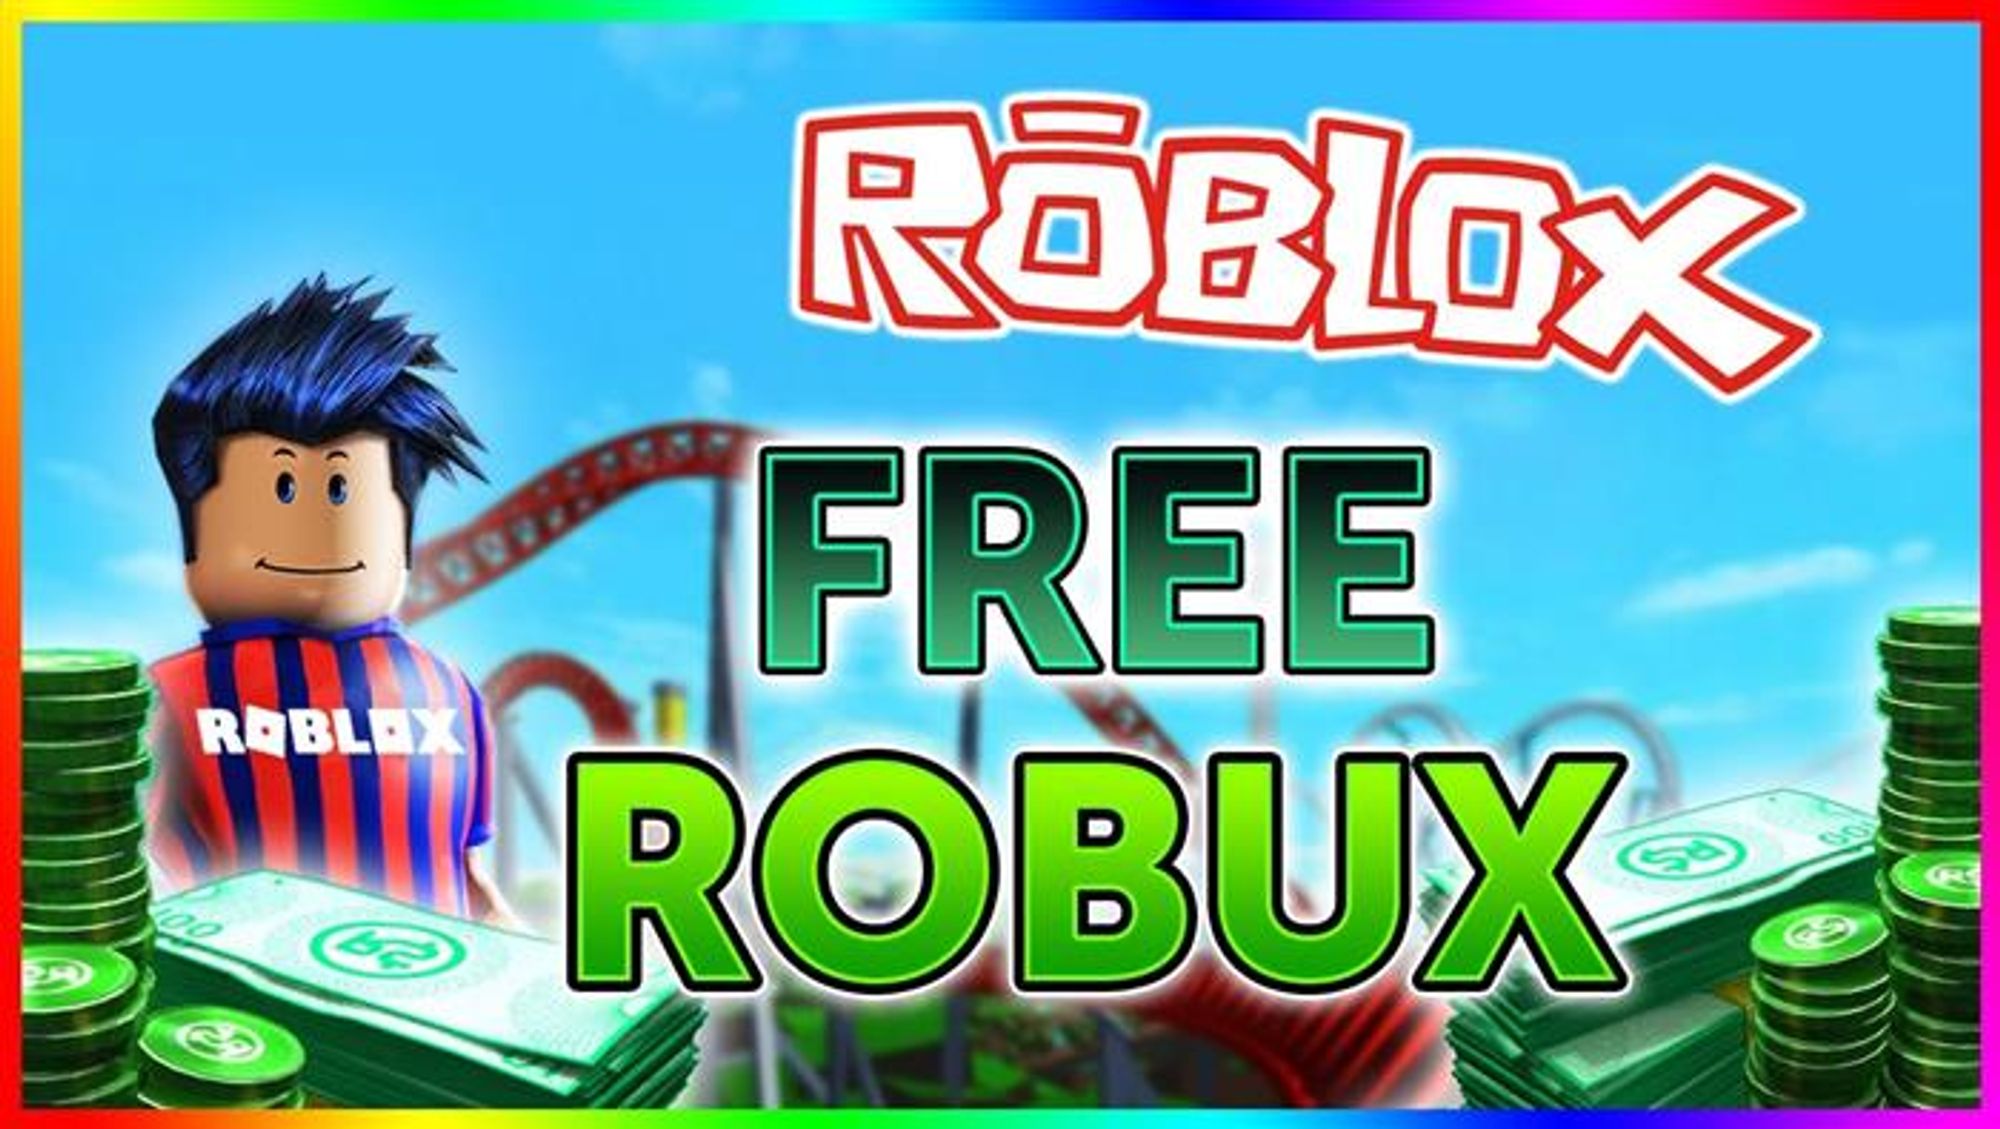 How To Get Free Robux